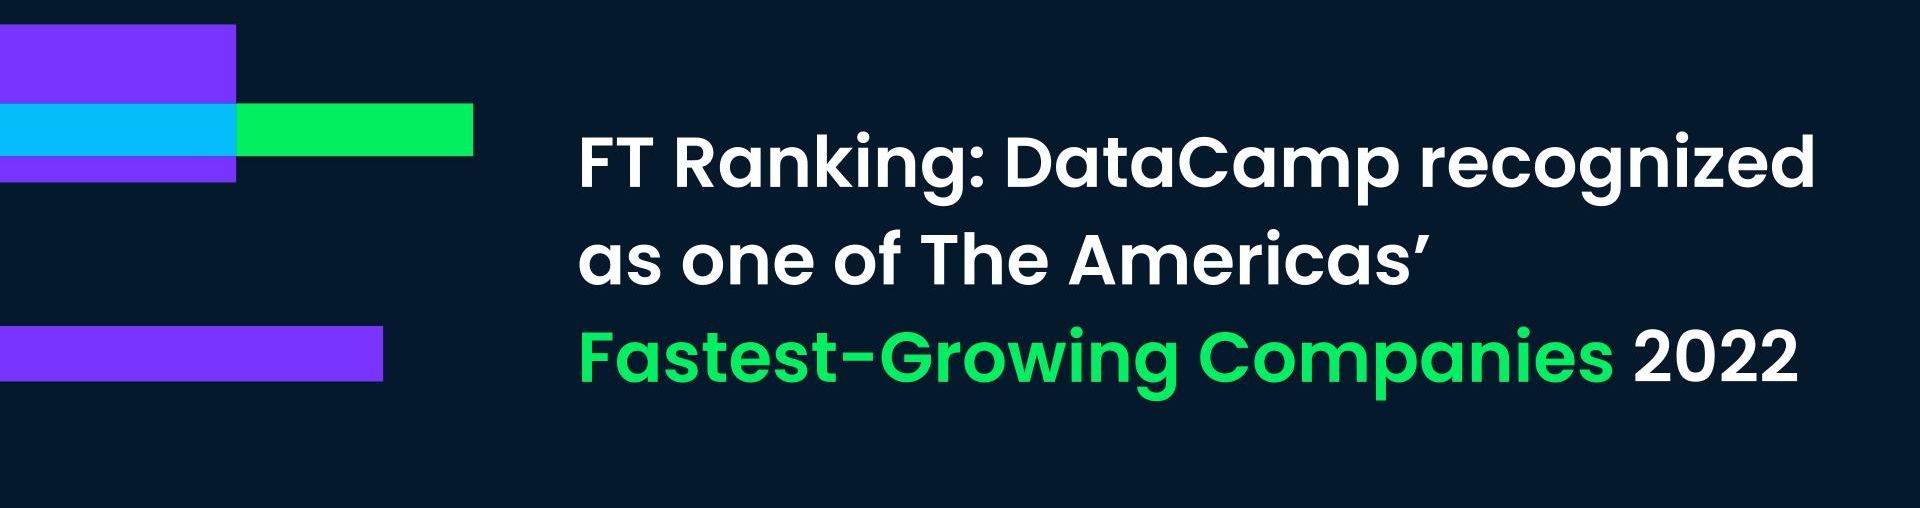 FT Ranking: DataCamp recognized as one of The Americas’ Fastest-Growing Companies 2022